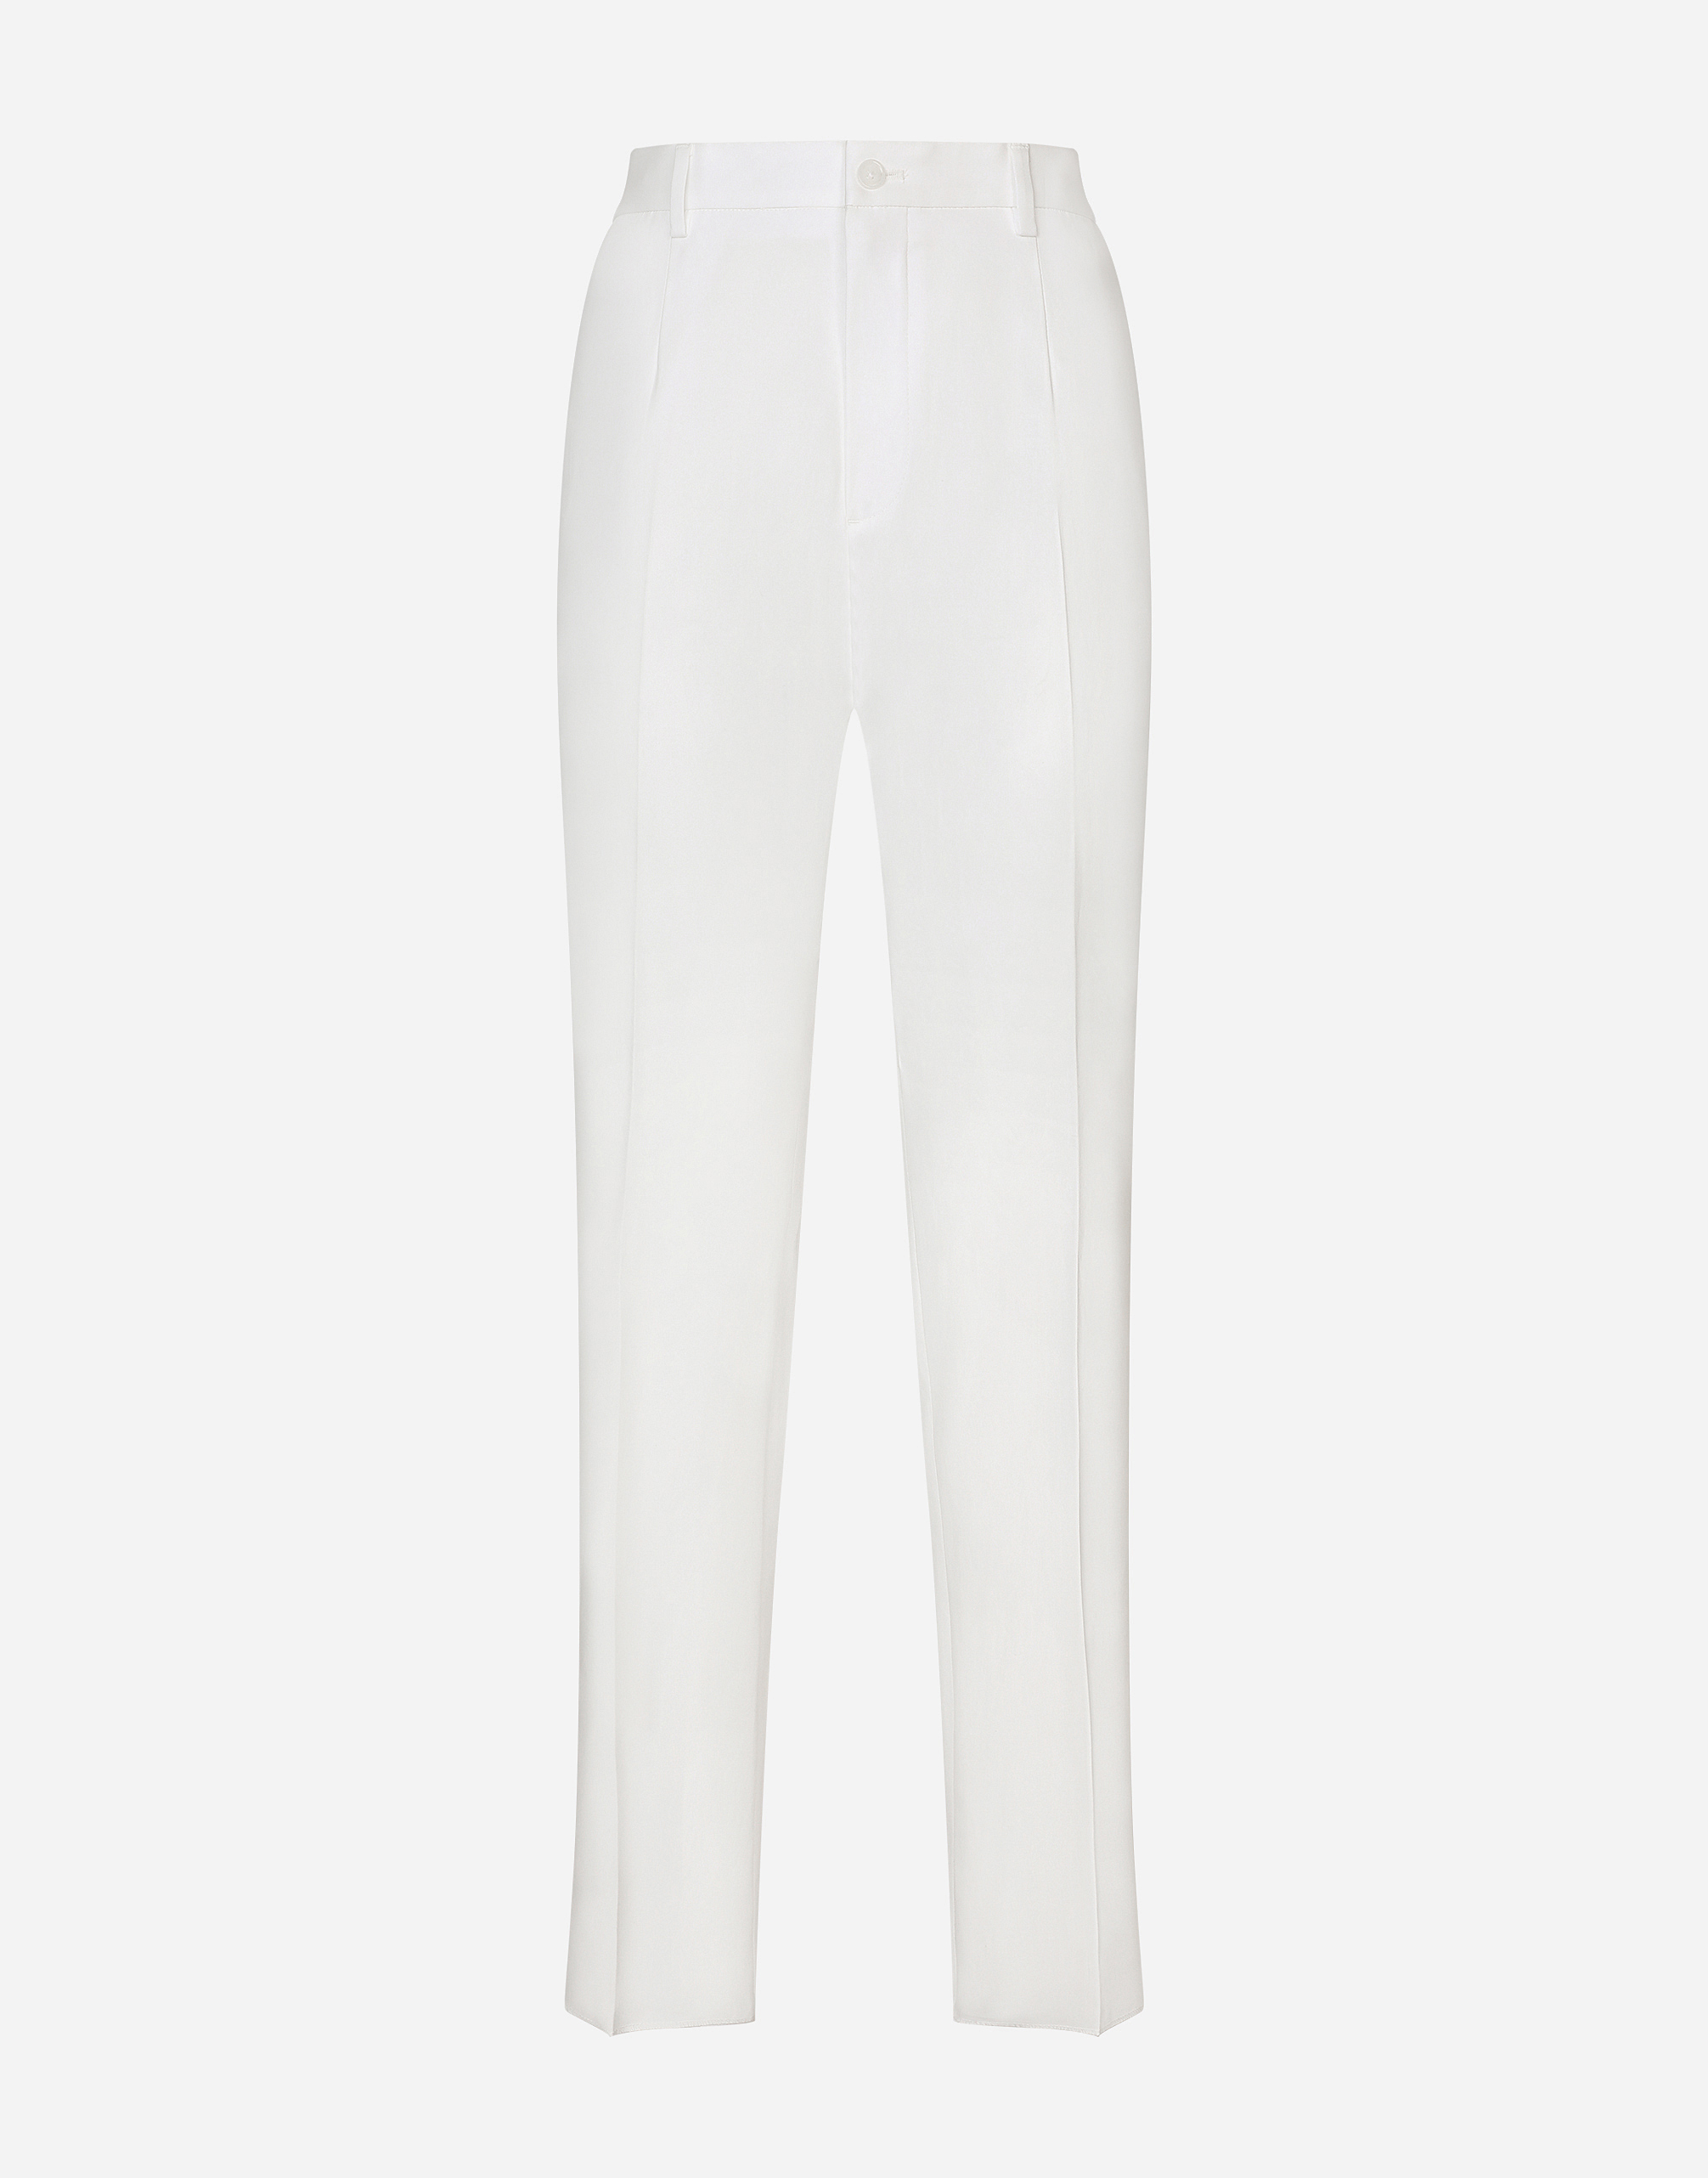 Stretch cotton pants with branded tag in White